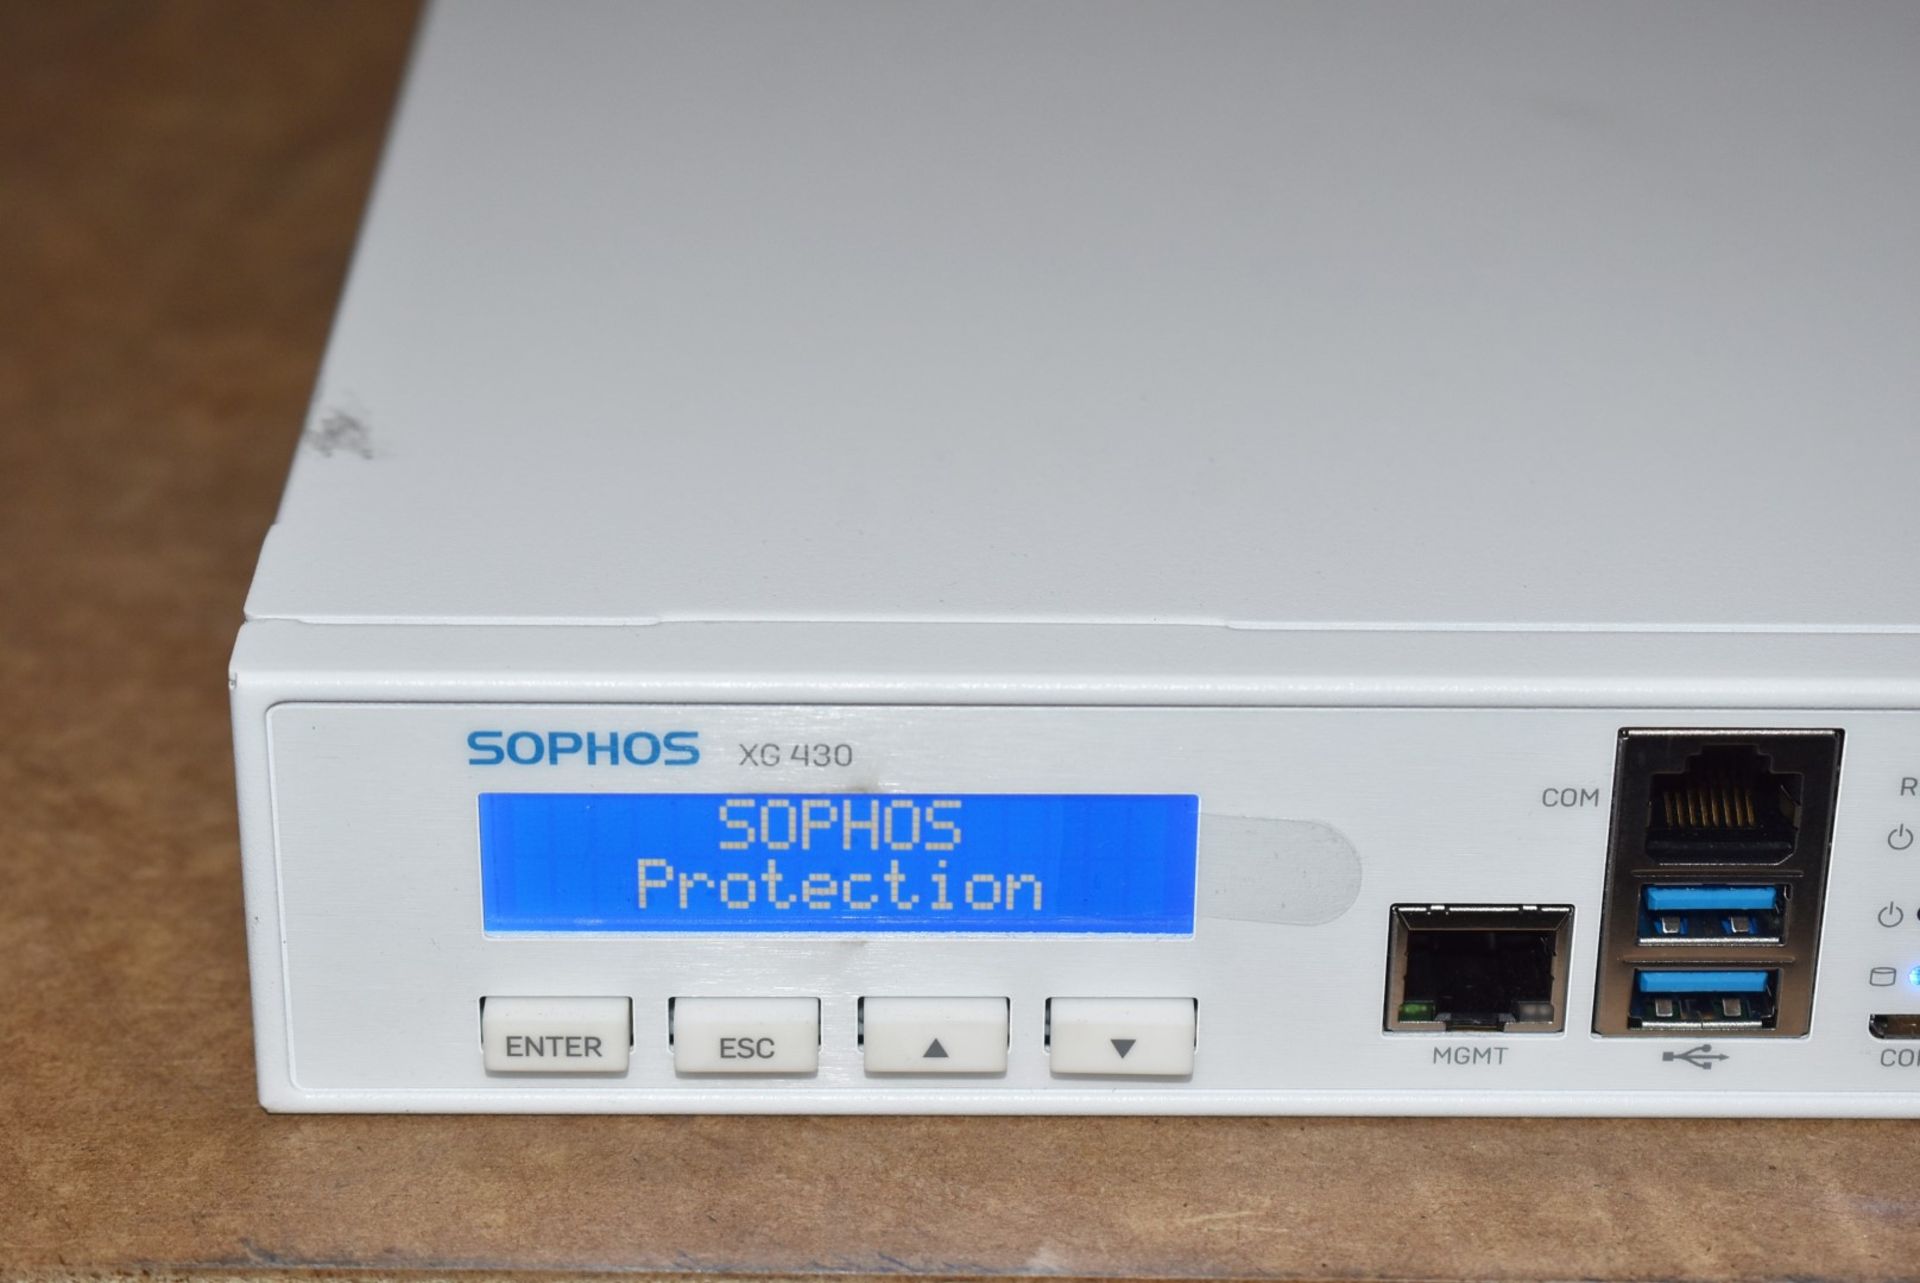 1 x Sophos XG430 Edge Firewall Appliance - Rev2 - Manufactured Jan 2019 - Includes Power Cable - - Image 10 of 11